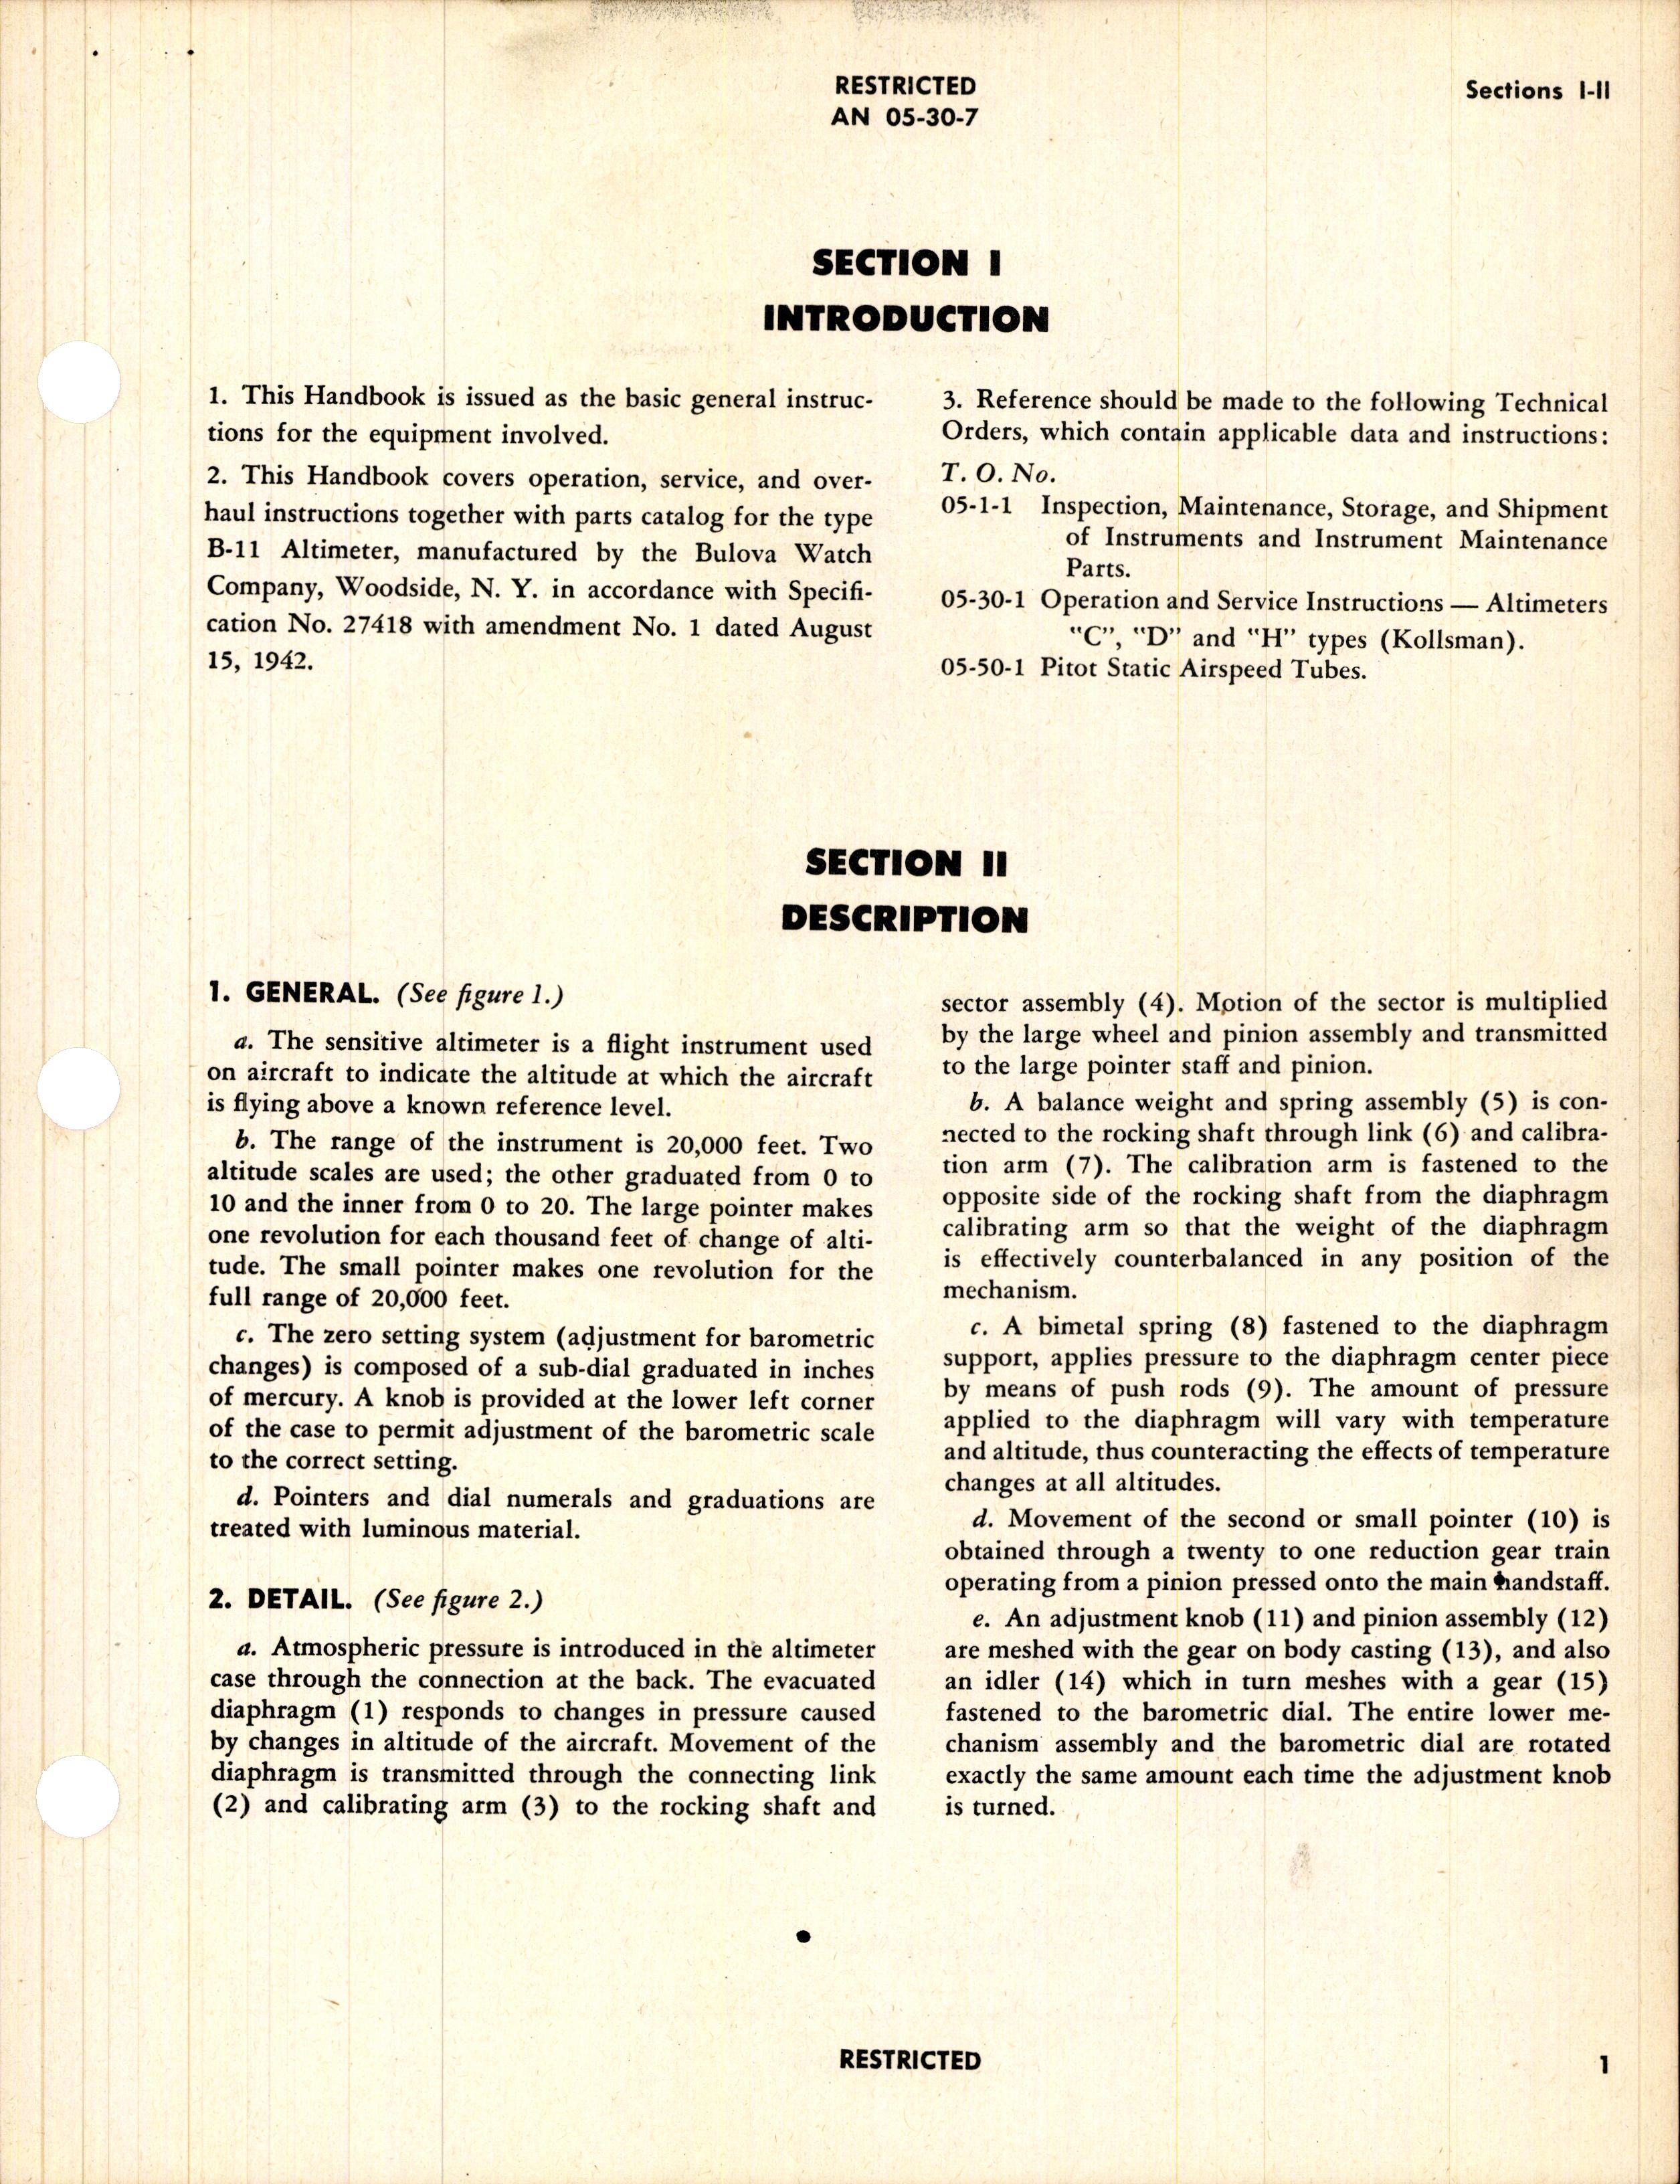 Sample page 5 from AirCorps Library document: Handbook of Instructions with Parts Catalog for Bulova Type B-11 Altimeter